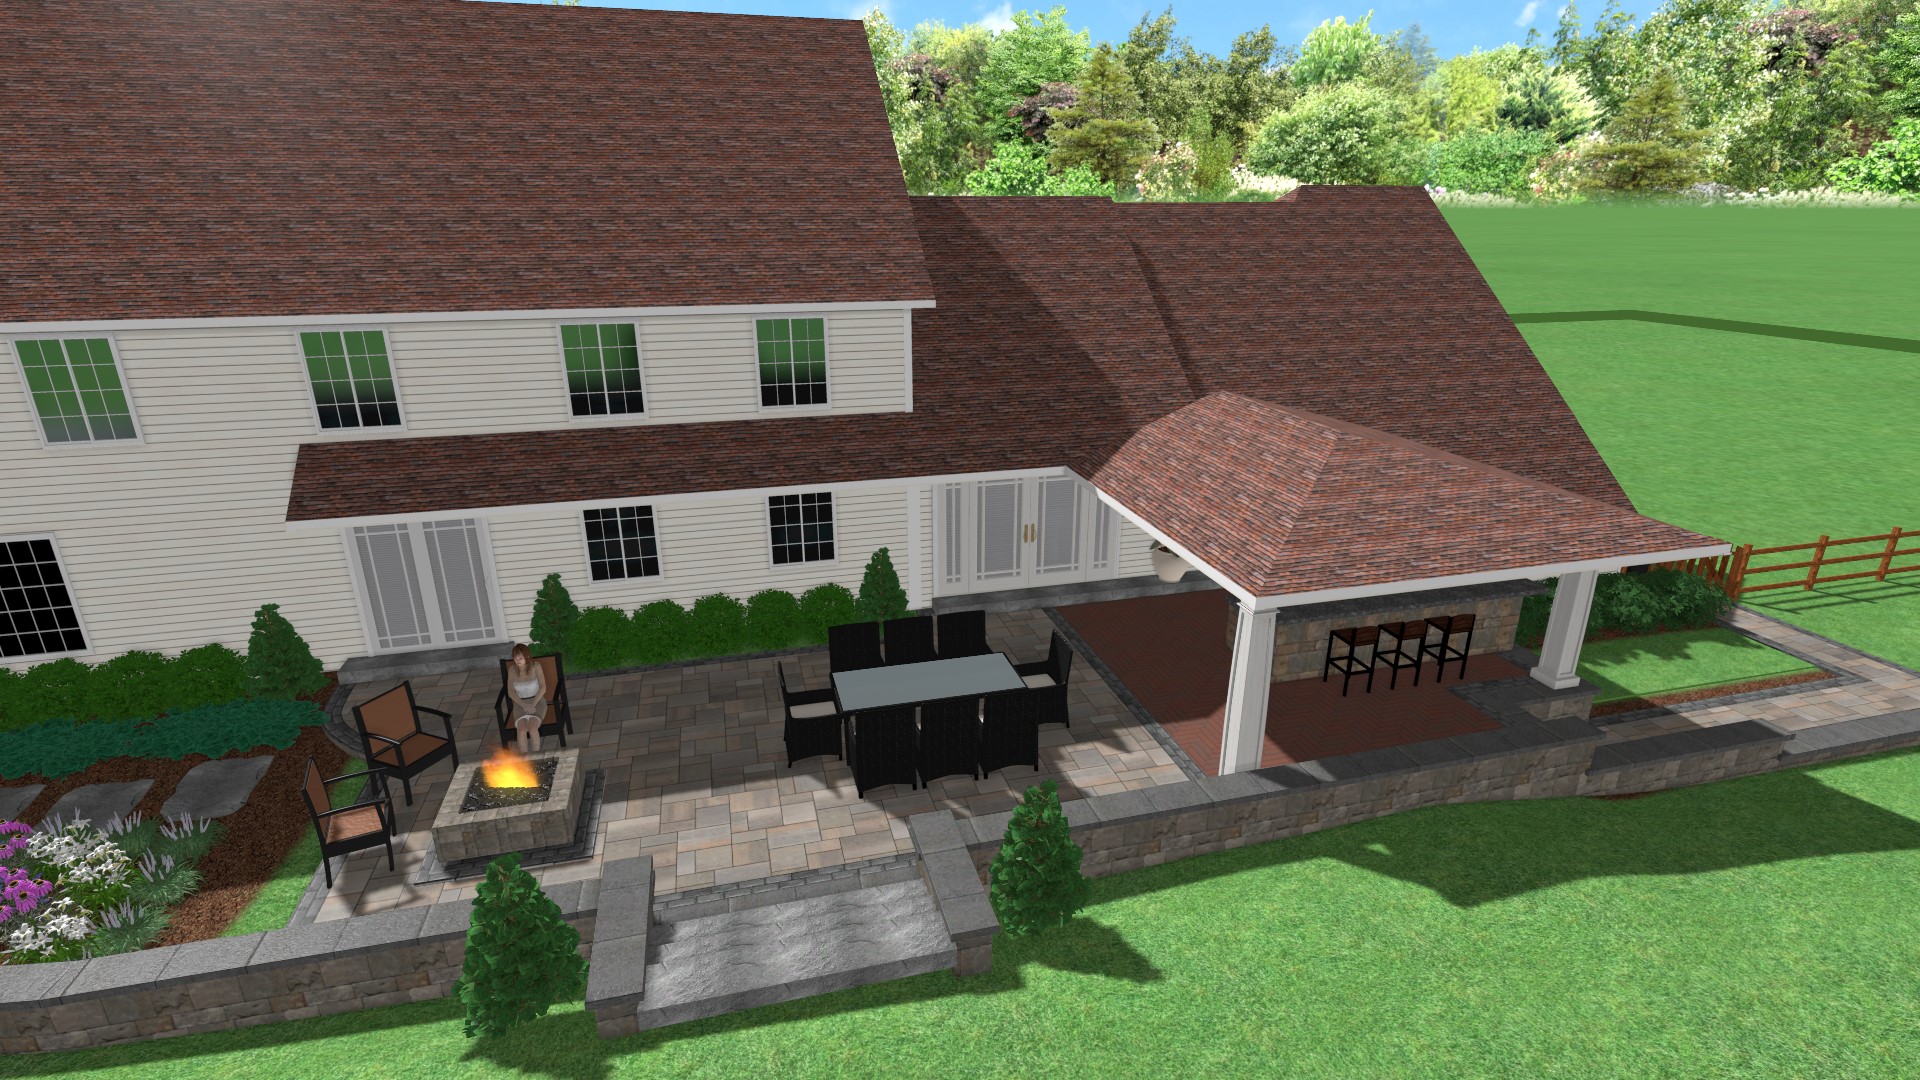 Full Estate Design and Planning in Haverford PA, Full Estate Design and Planning in Collegeville PA